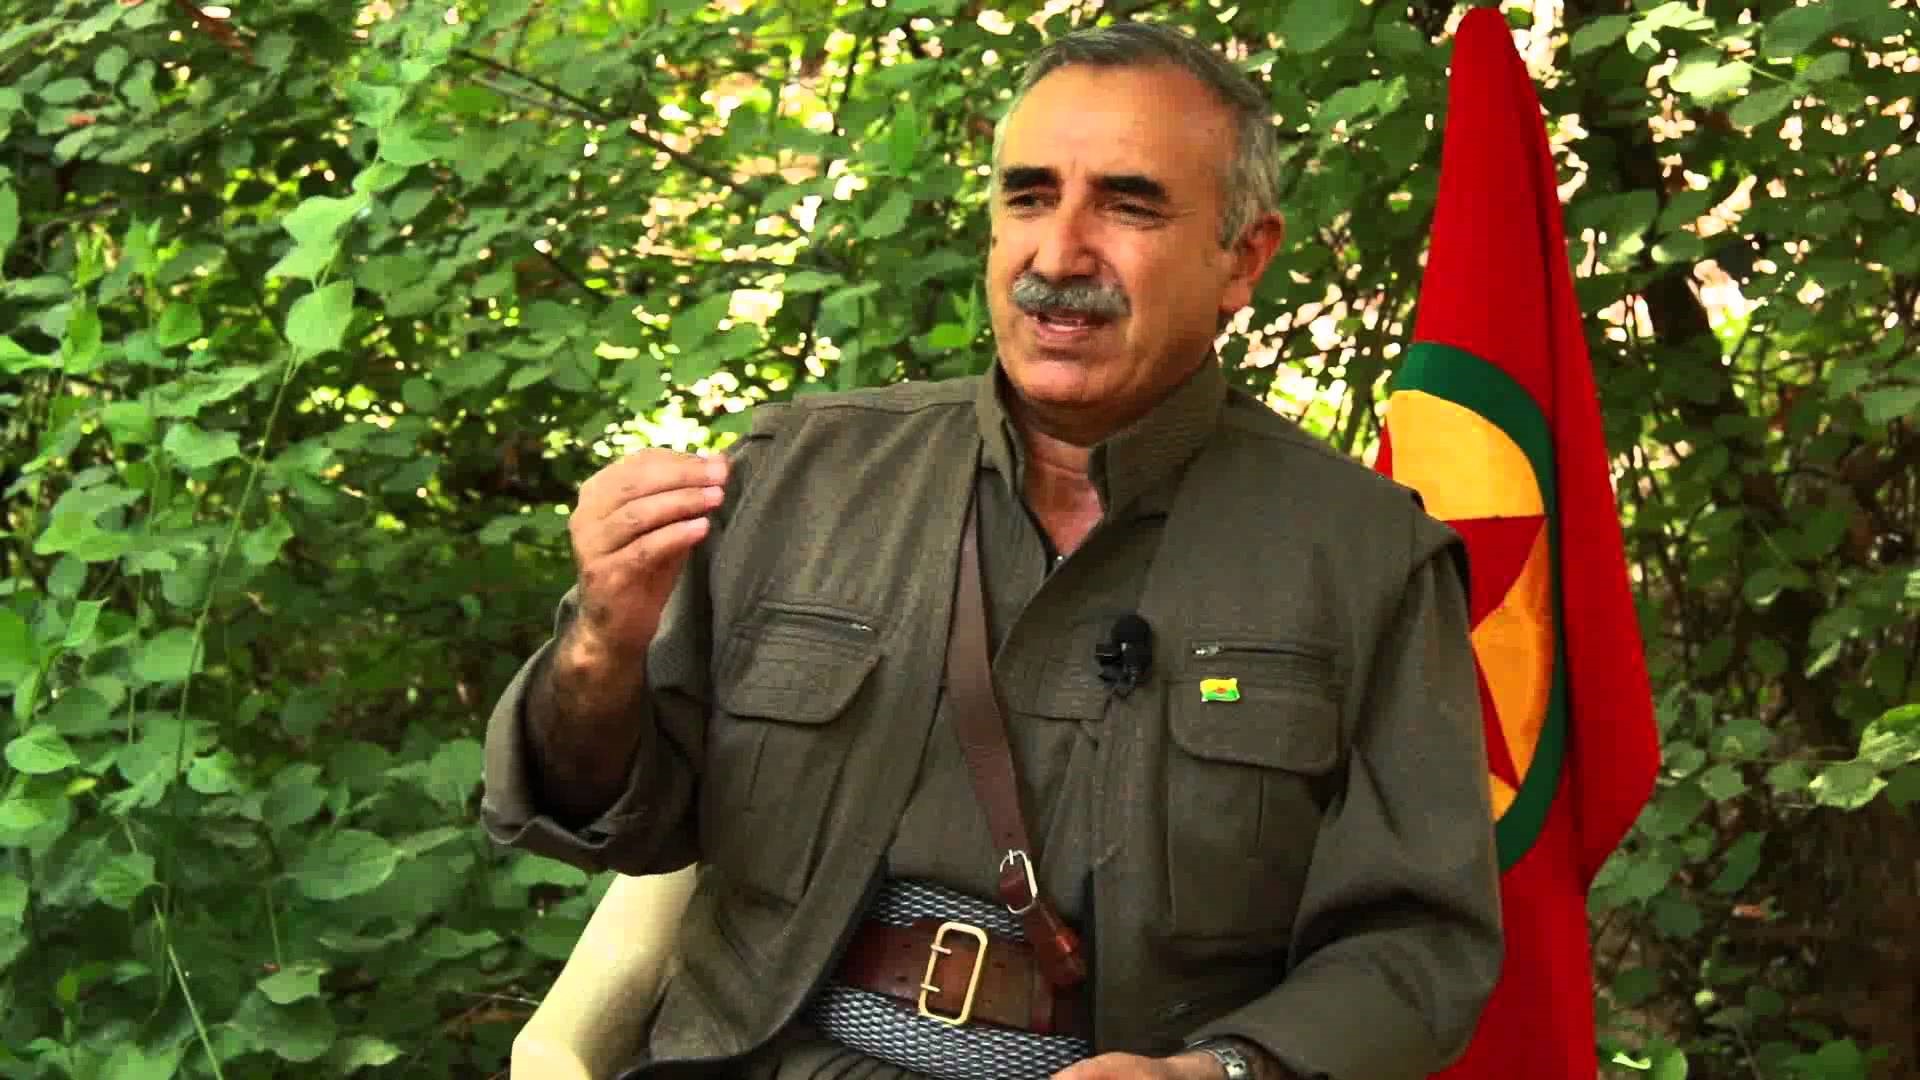 Kurdistan Workers Party (PKK) Statement: Turkey conceals its real losses in war against PKK and publish false reports